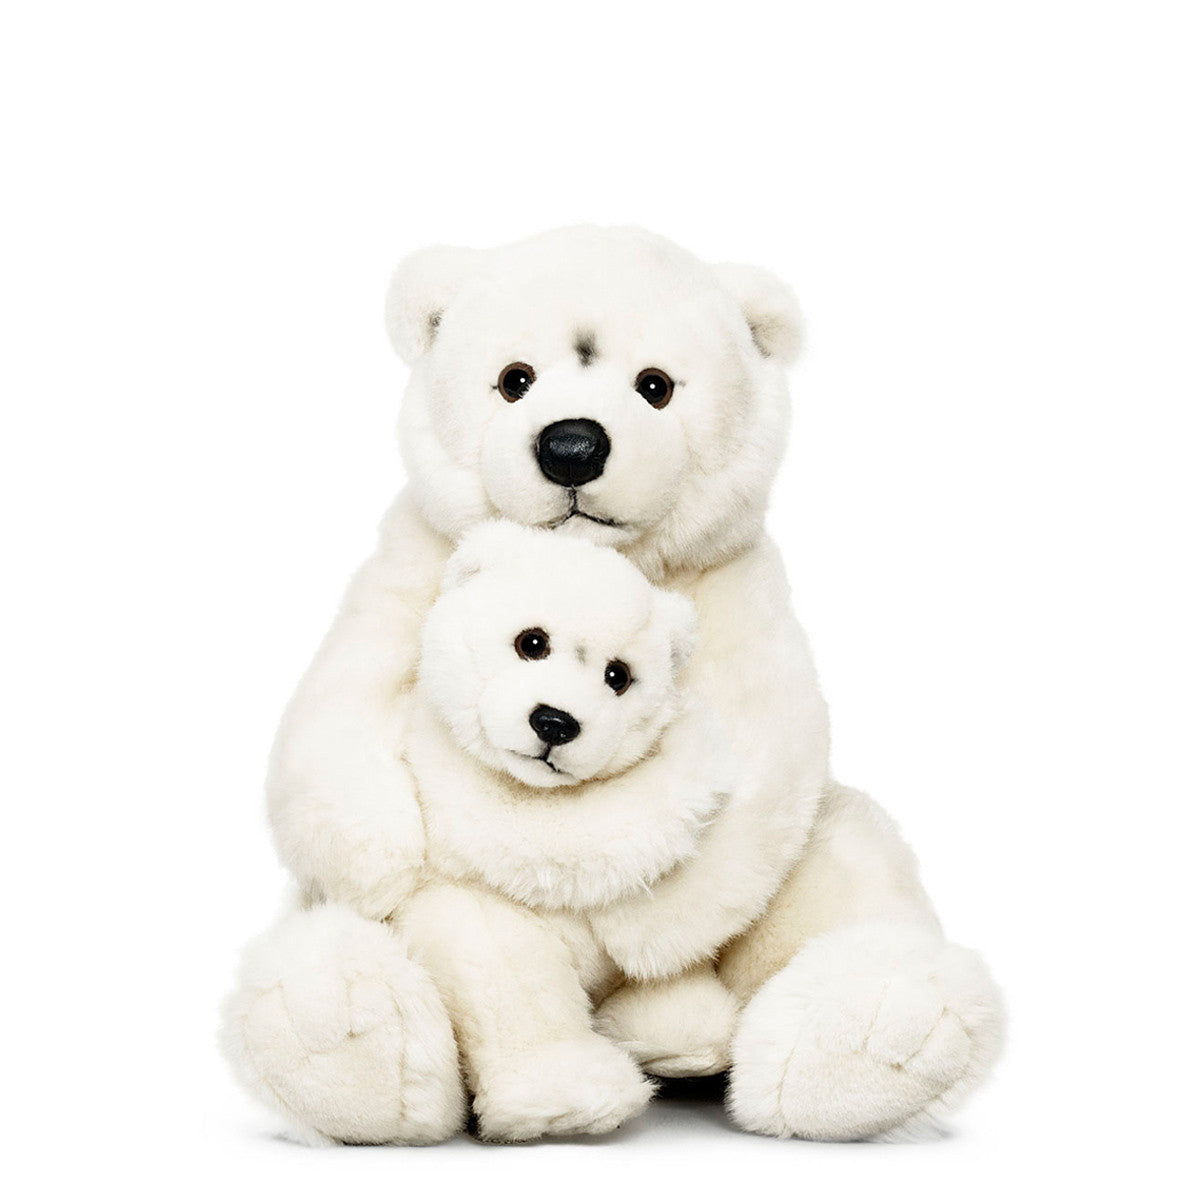 Peluche - Famille d’ours polaires